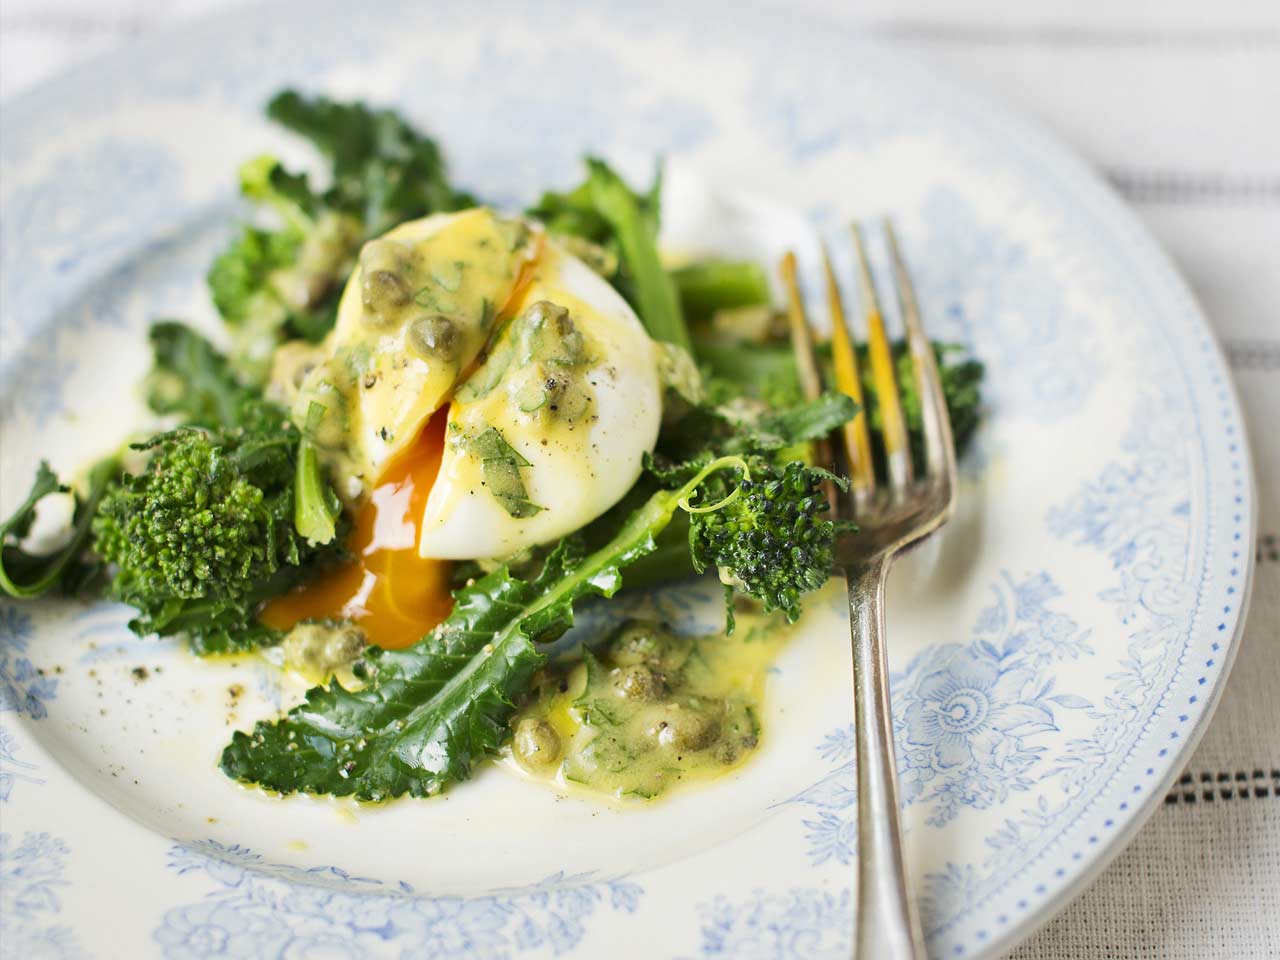 Purple sprouting broccoli and soft-boiled egg